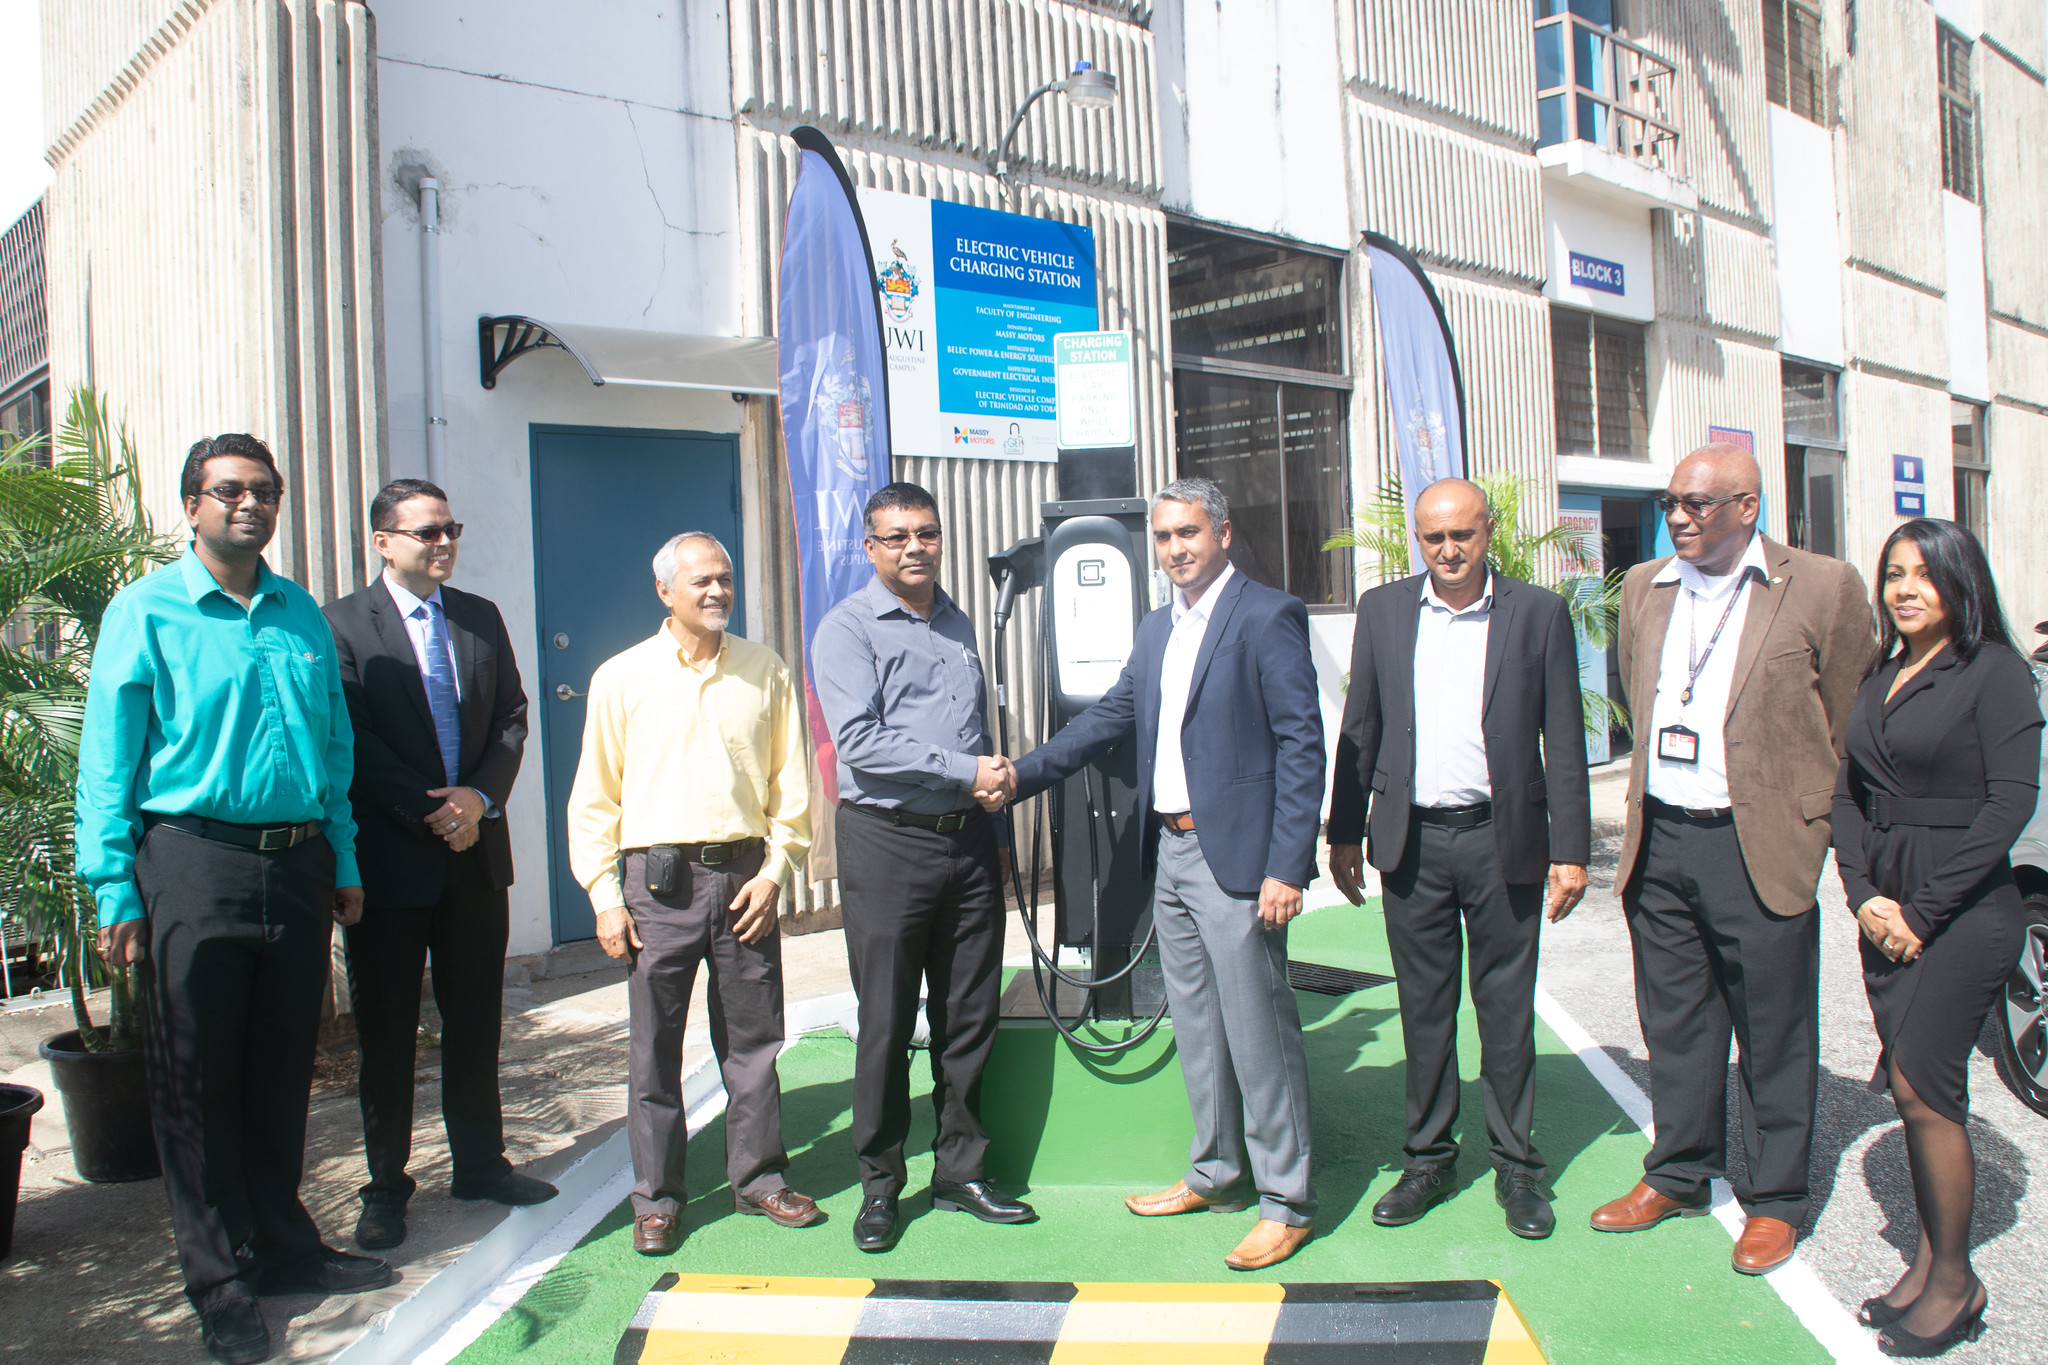 ey stakeholders greet each other at the launch of The UWI St. Augustine Campus’ first electric vehicle charging station:  Mr. Kevin Baboolal, Deputy Chief Electrical Inspector, Government Electrical Inspectorate; Mr. Jeremy Pagee, Assistant Vice President, Structural Changes, Massy Motors; Professor Chandrabhan Sharma, Department of Electrical and Computer Engineering and Representative of the Electric Vehicle Company of Trinidad and Tobago; Mr. Winston Boodoo, Managing Director,  BELEC  Power and Energy Solutions Limited;  Dr Sanjay Bahadoorsingh, Deputy Dean, Enterprise Development and Outreach and Senior Lecturer in the Department of Electrical and Computer Engineering; Mr. Dhanraj Samlal, Property and Projects Manager at Massy Motors; Pro Vice-Chancellor and Campus Principal, The UWI St. Augustine Professor Brian Copeland; and Ms. Tabitha Gopaul, General Manager, BELEC  Power and Energy Solutions Limited.